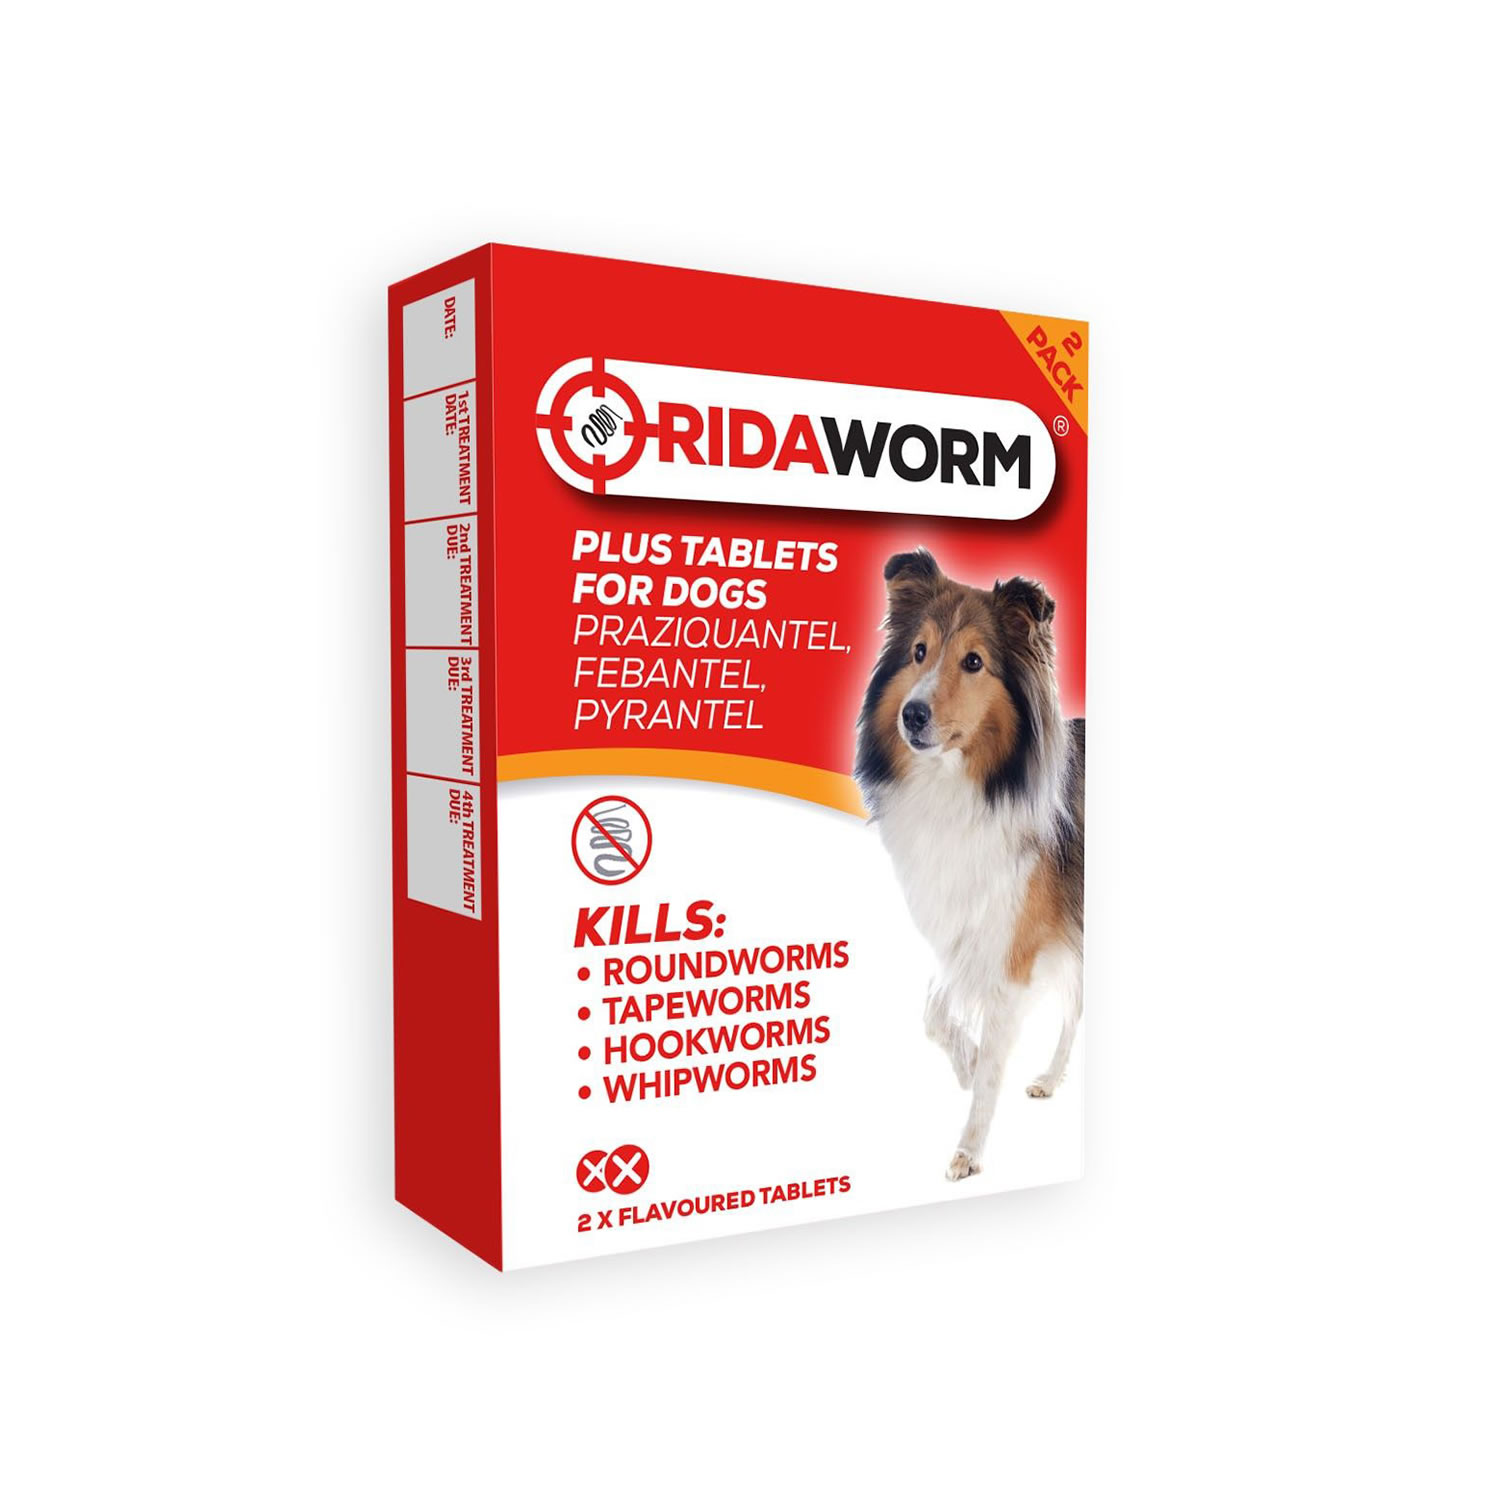 CHANELLE RIDAWORM DOG TABLETS 2 TABLETS 2 TABLETS